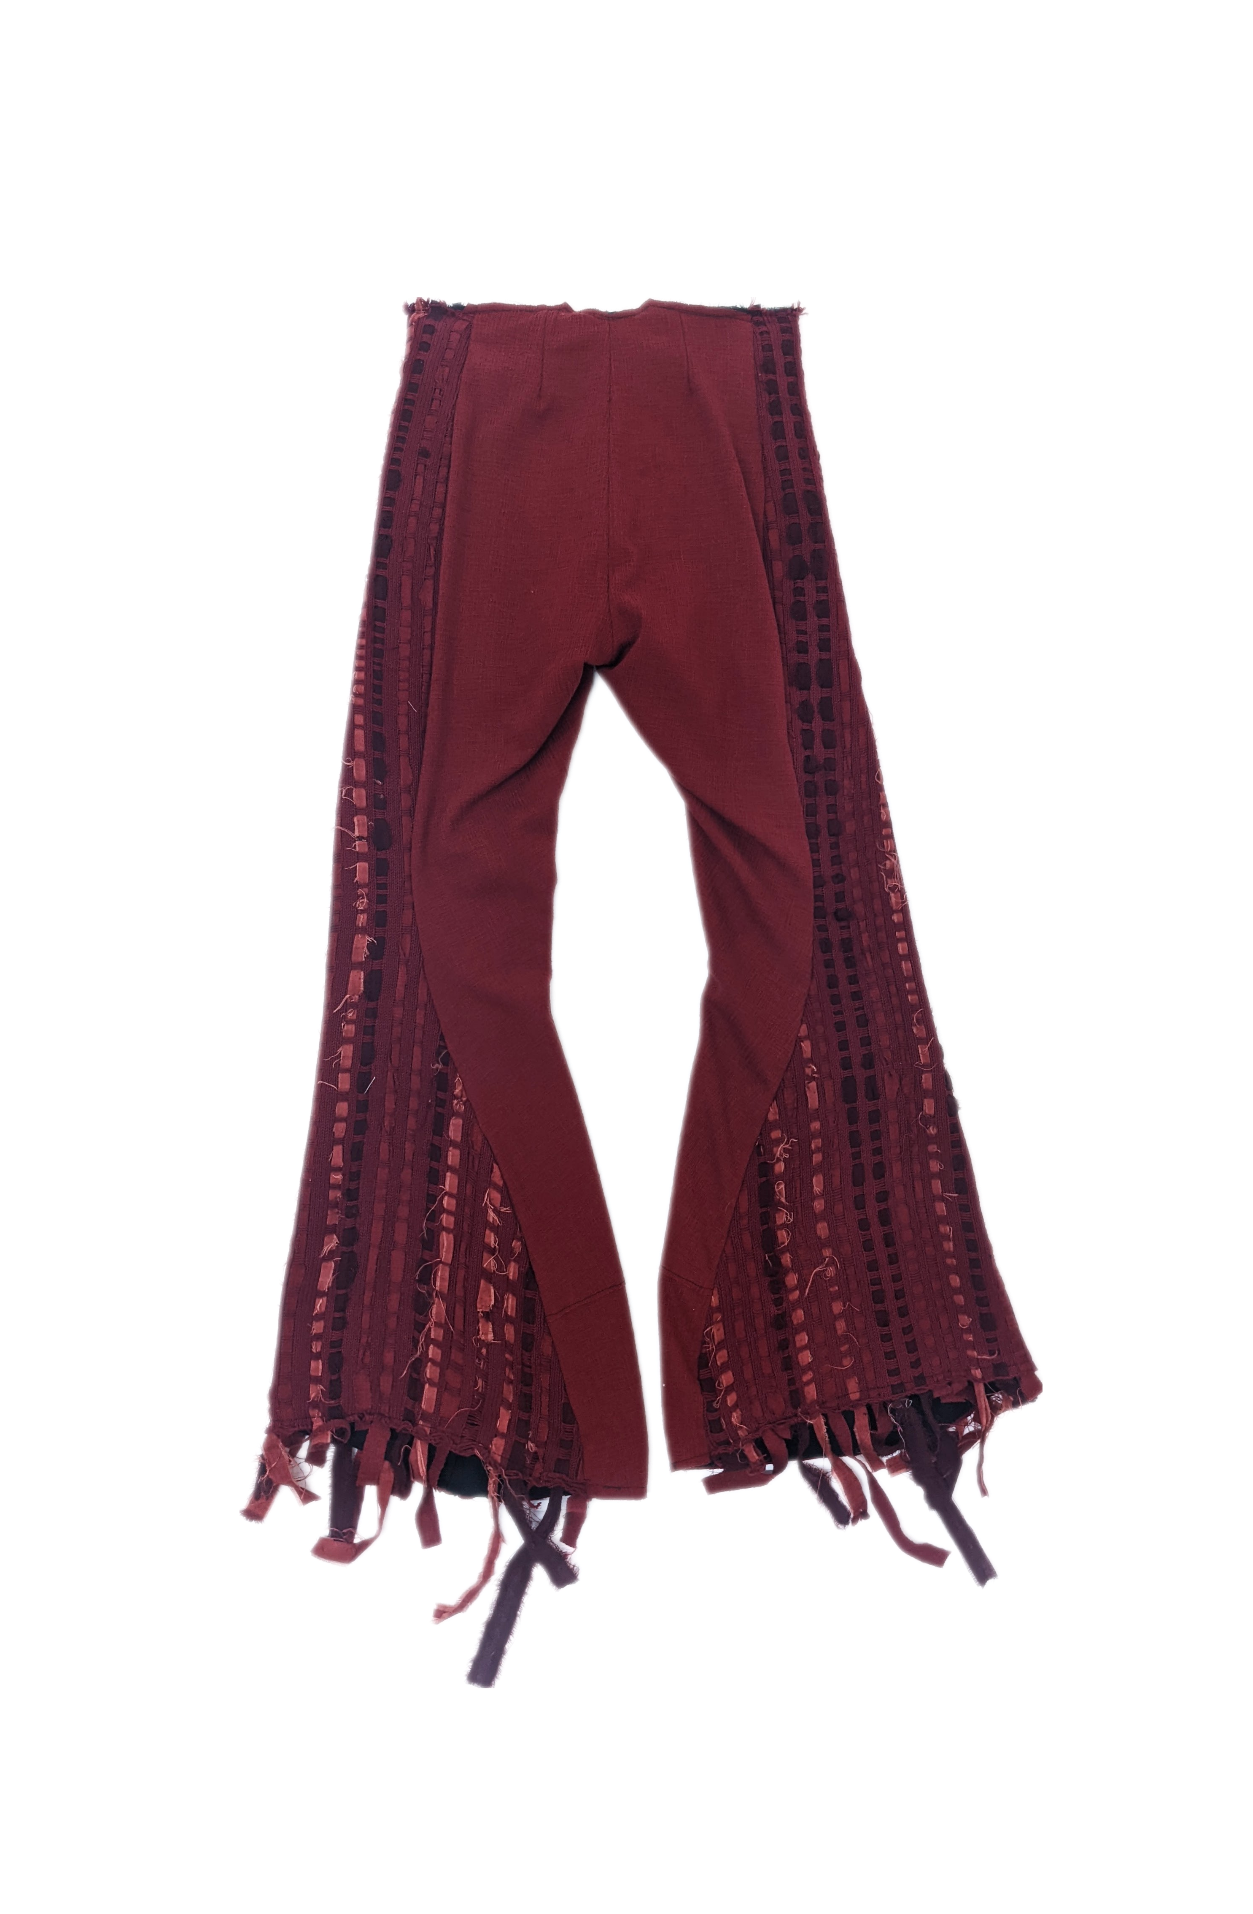 Curved Seam High Waisted Flares in Red Knitted Hand Woven Off-Cuts From the Atelier and Dead stock Red Jersey